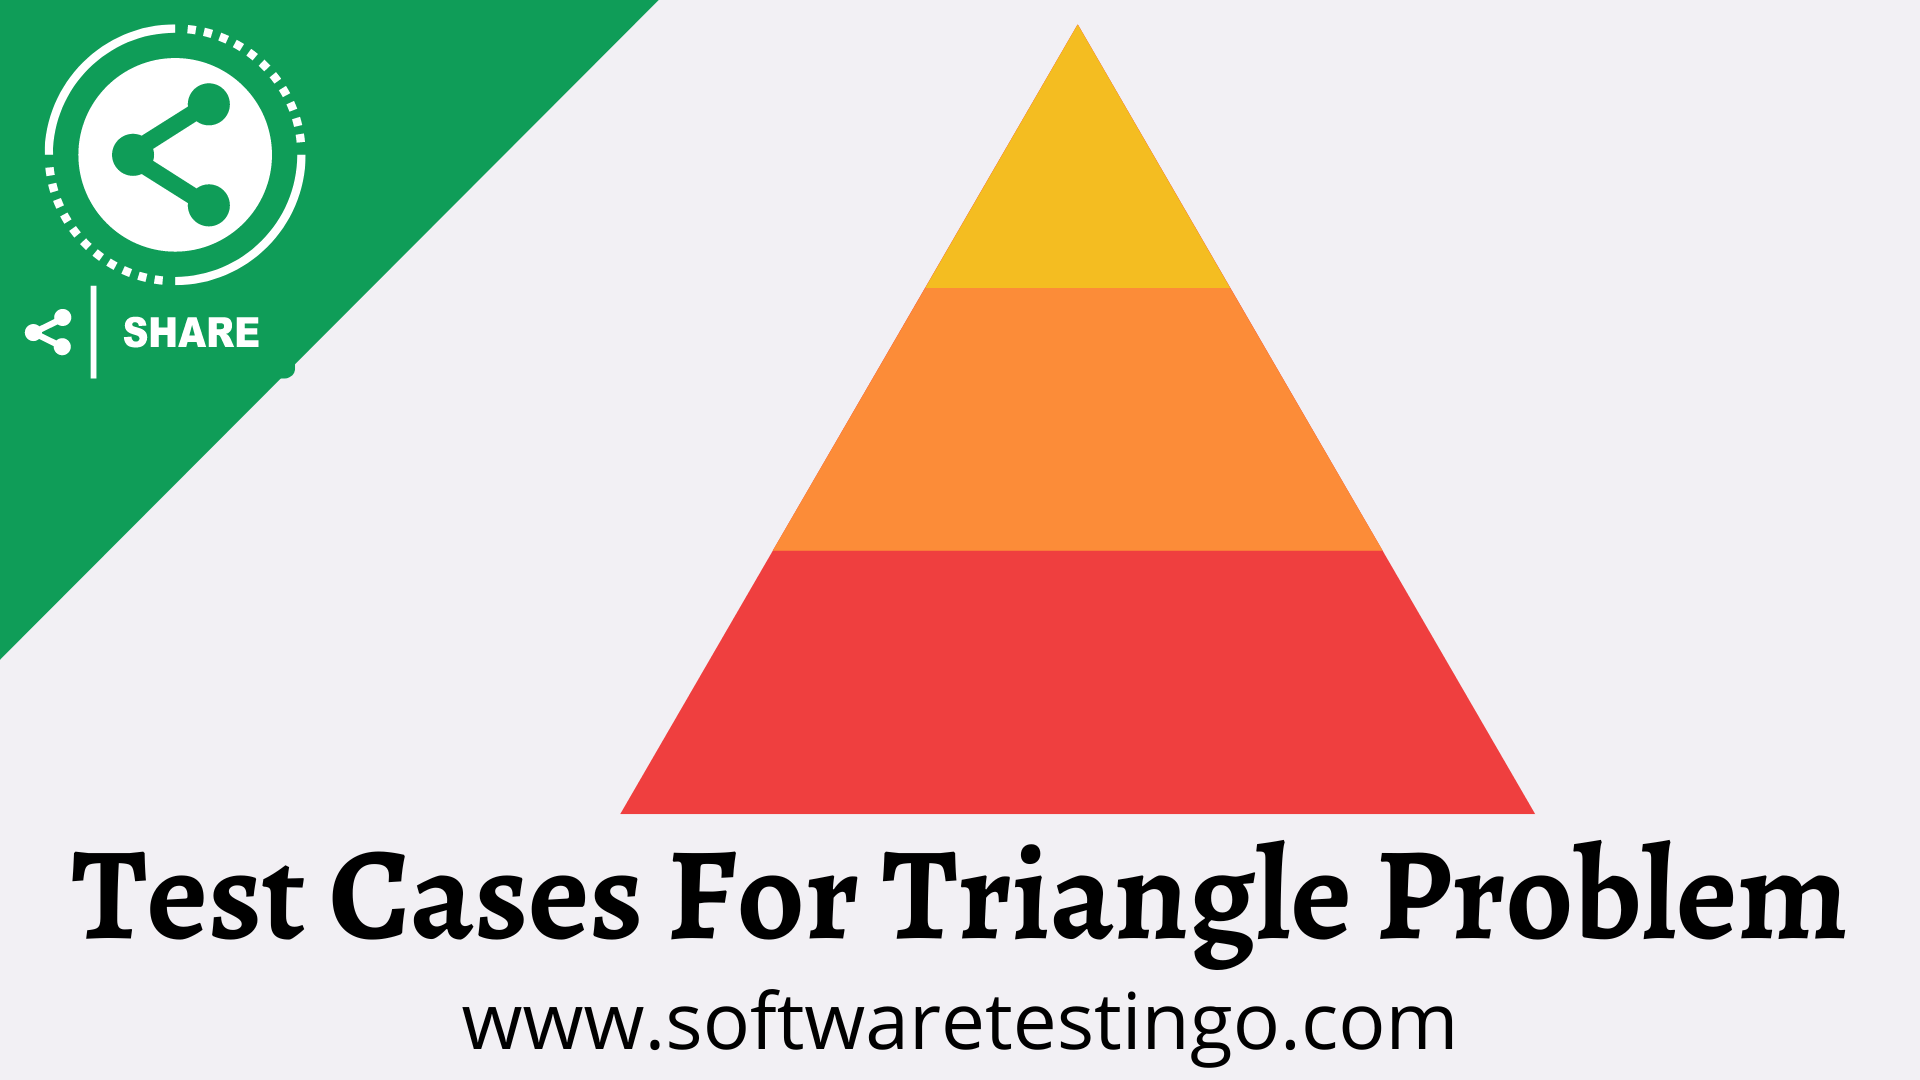 Test Cases For Triangle Problem